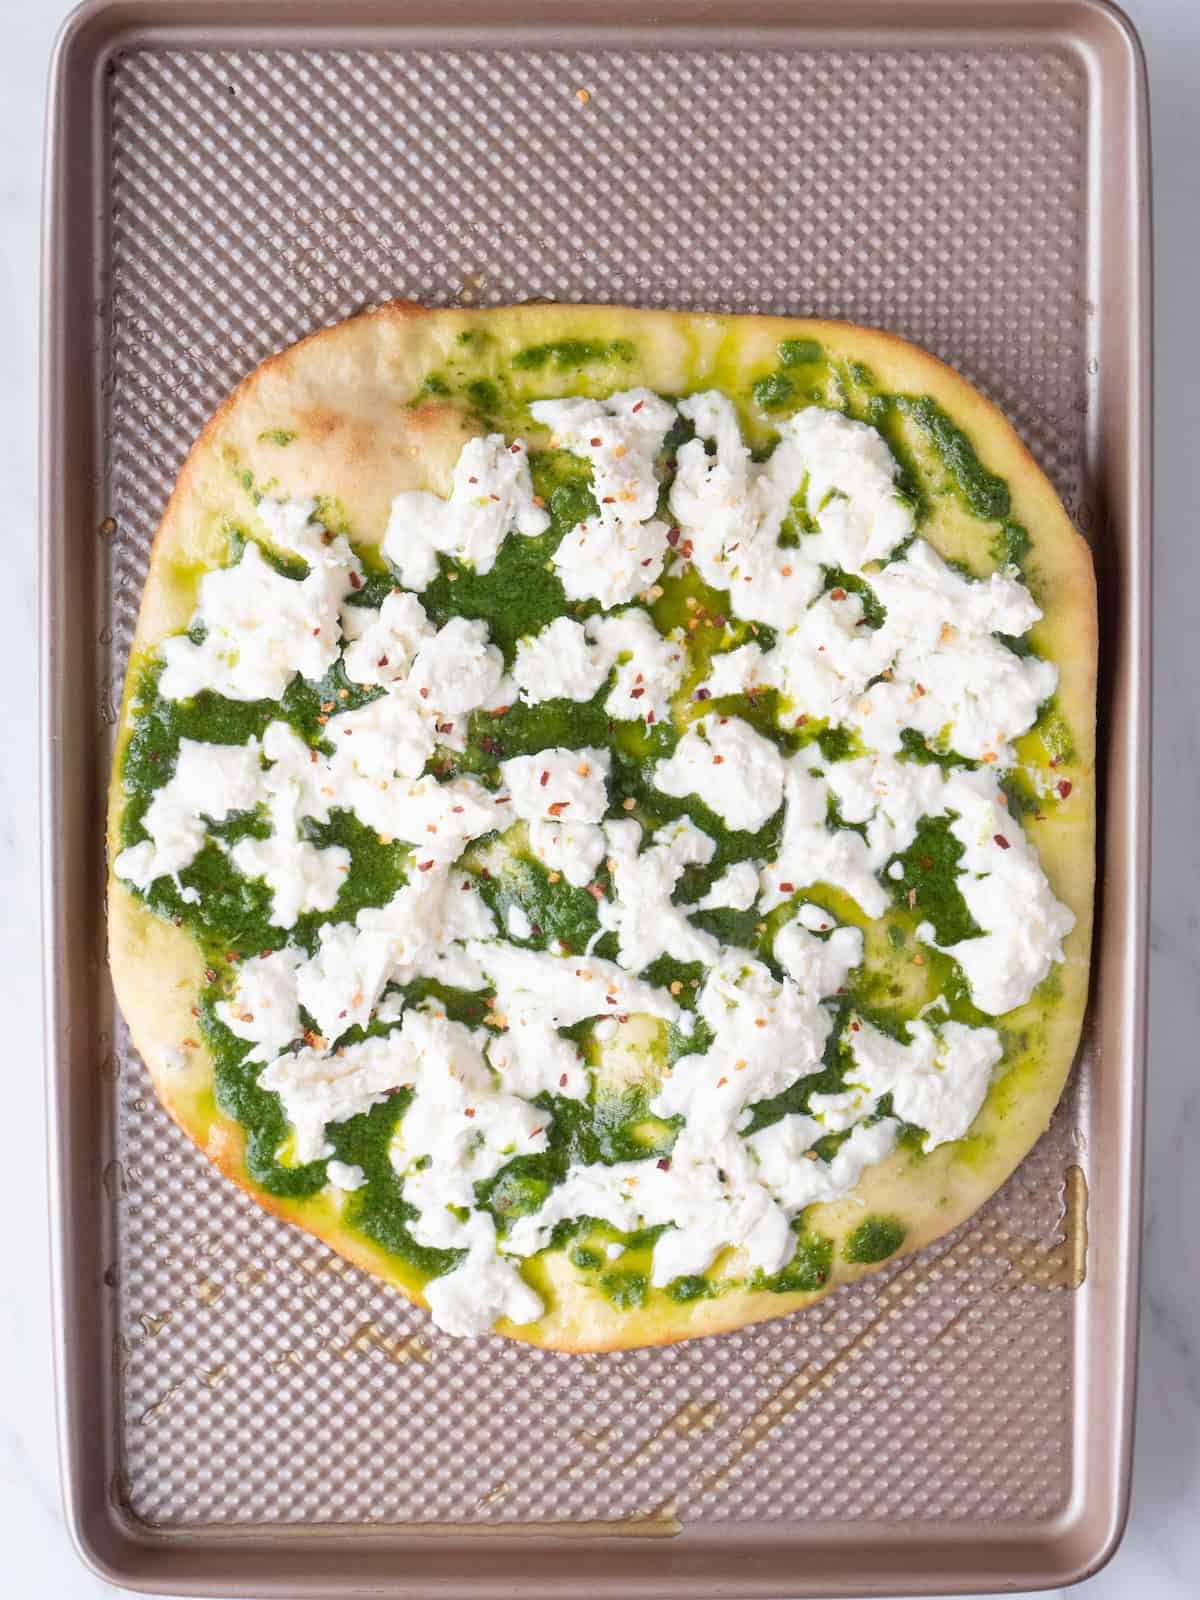 A baking sheet with a baked pizza dough, then topped with basil vinaigrette, fresh burrata torn into small pieces, and red pepper flakes.